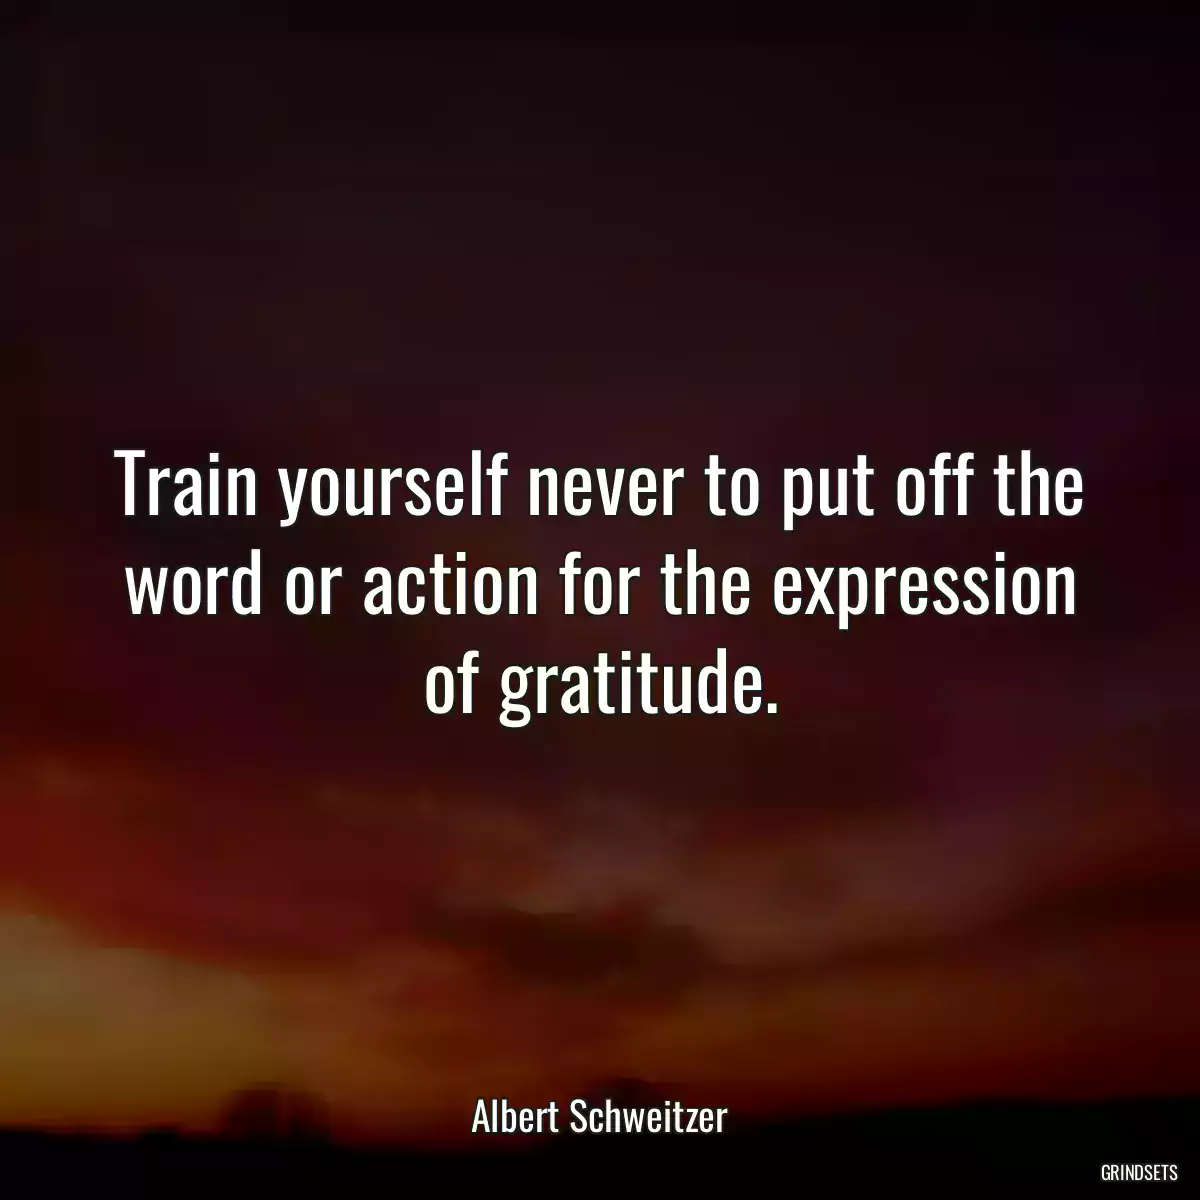 Train yourself never to put off the word or action for the expression of gratitude.